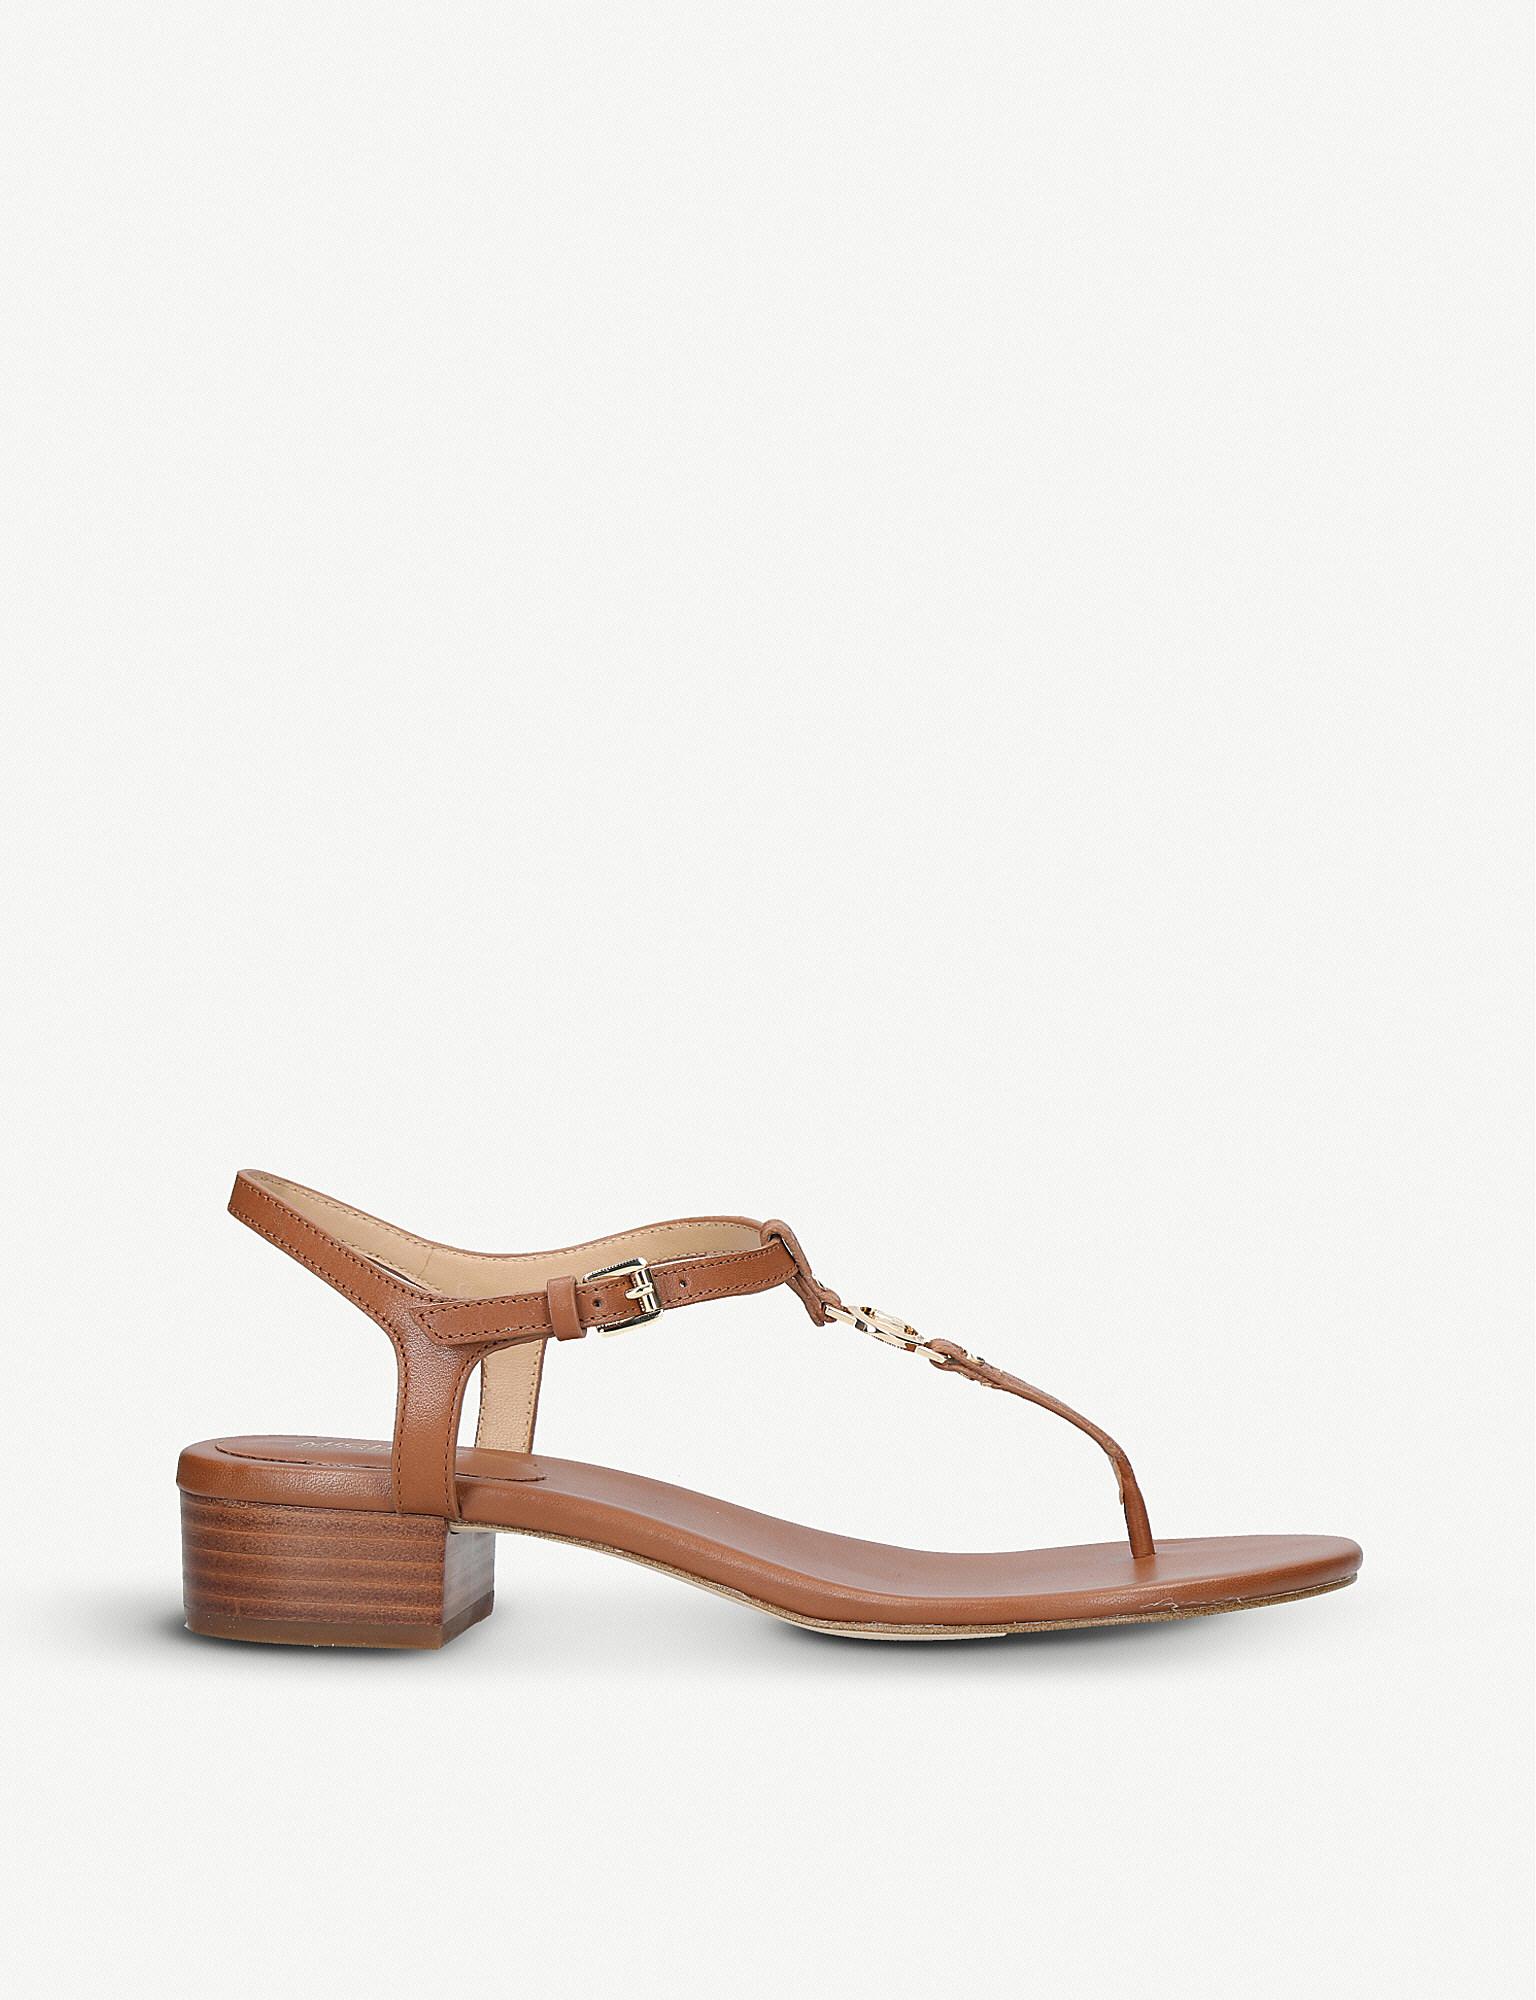 MICHAEL Michael Kors Cayla Mid Leather Sandals in Tan (Brown) | Lyst